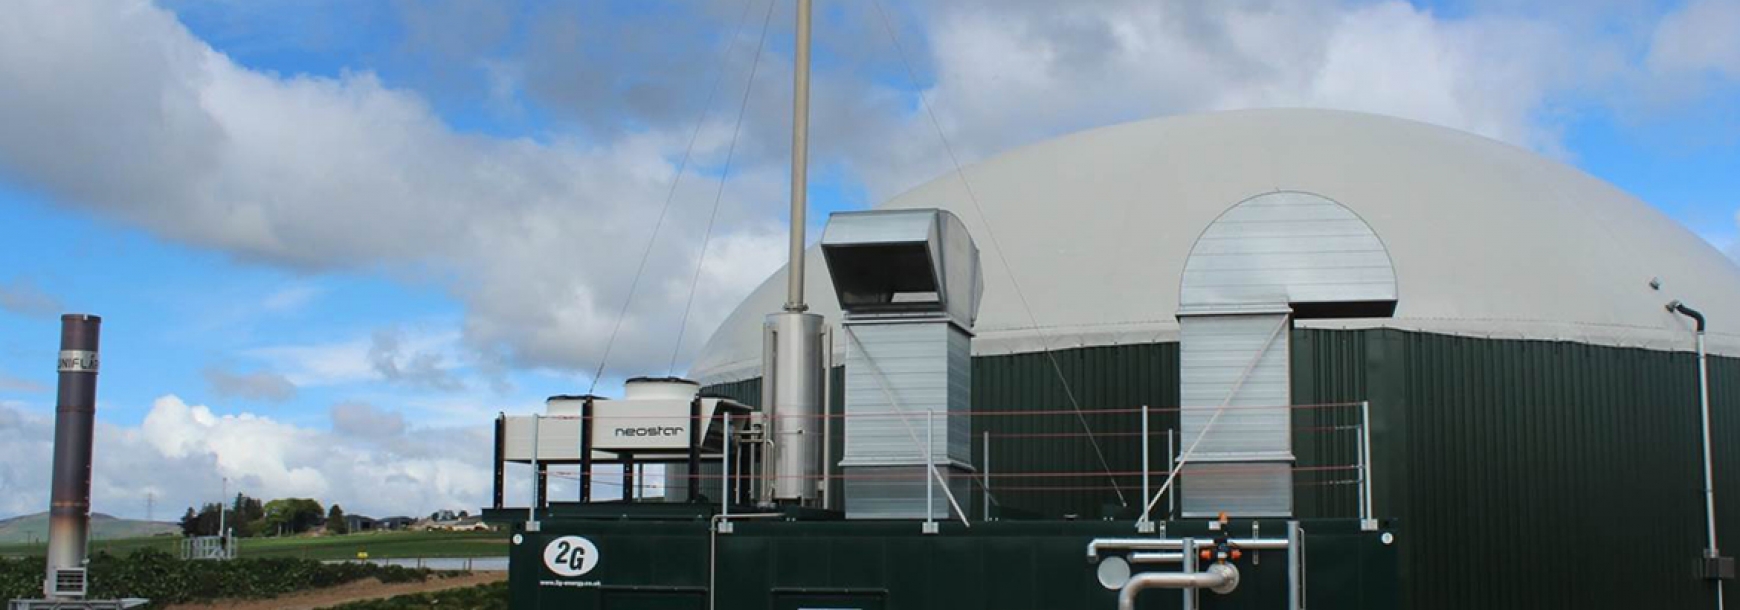 Renewable electricity generating system representing NFU Energy's FiT application and compliance service 